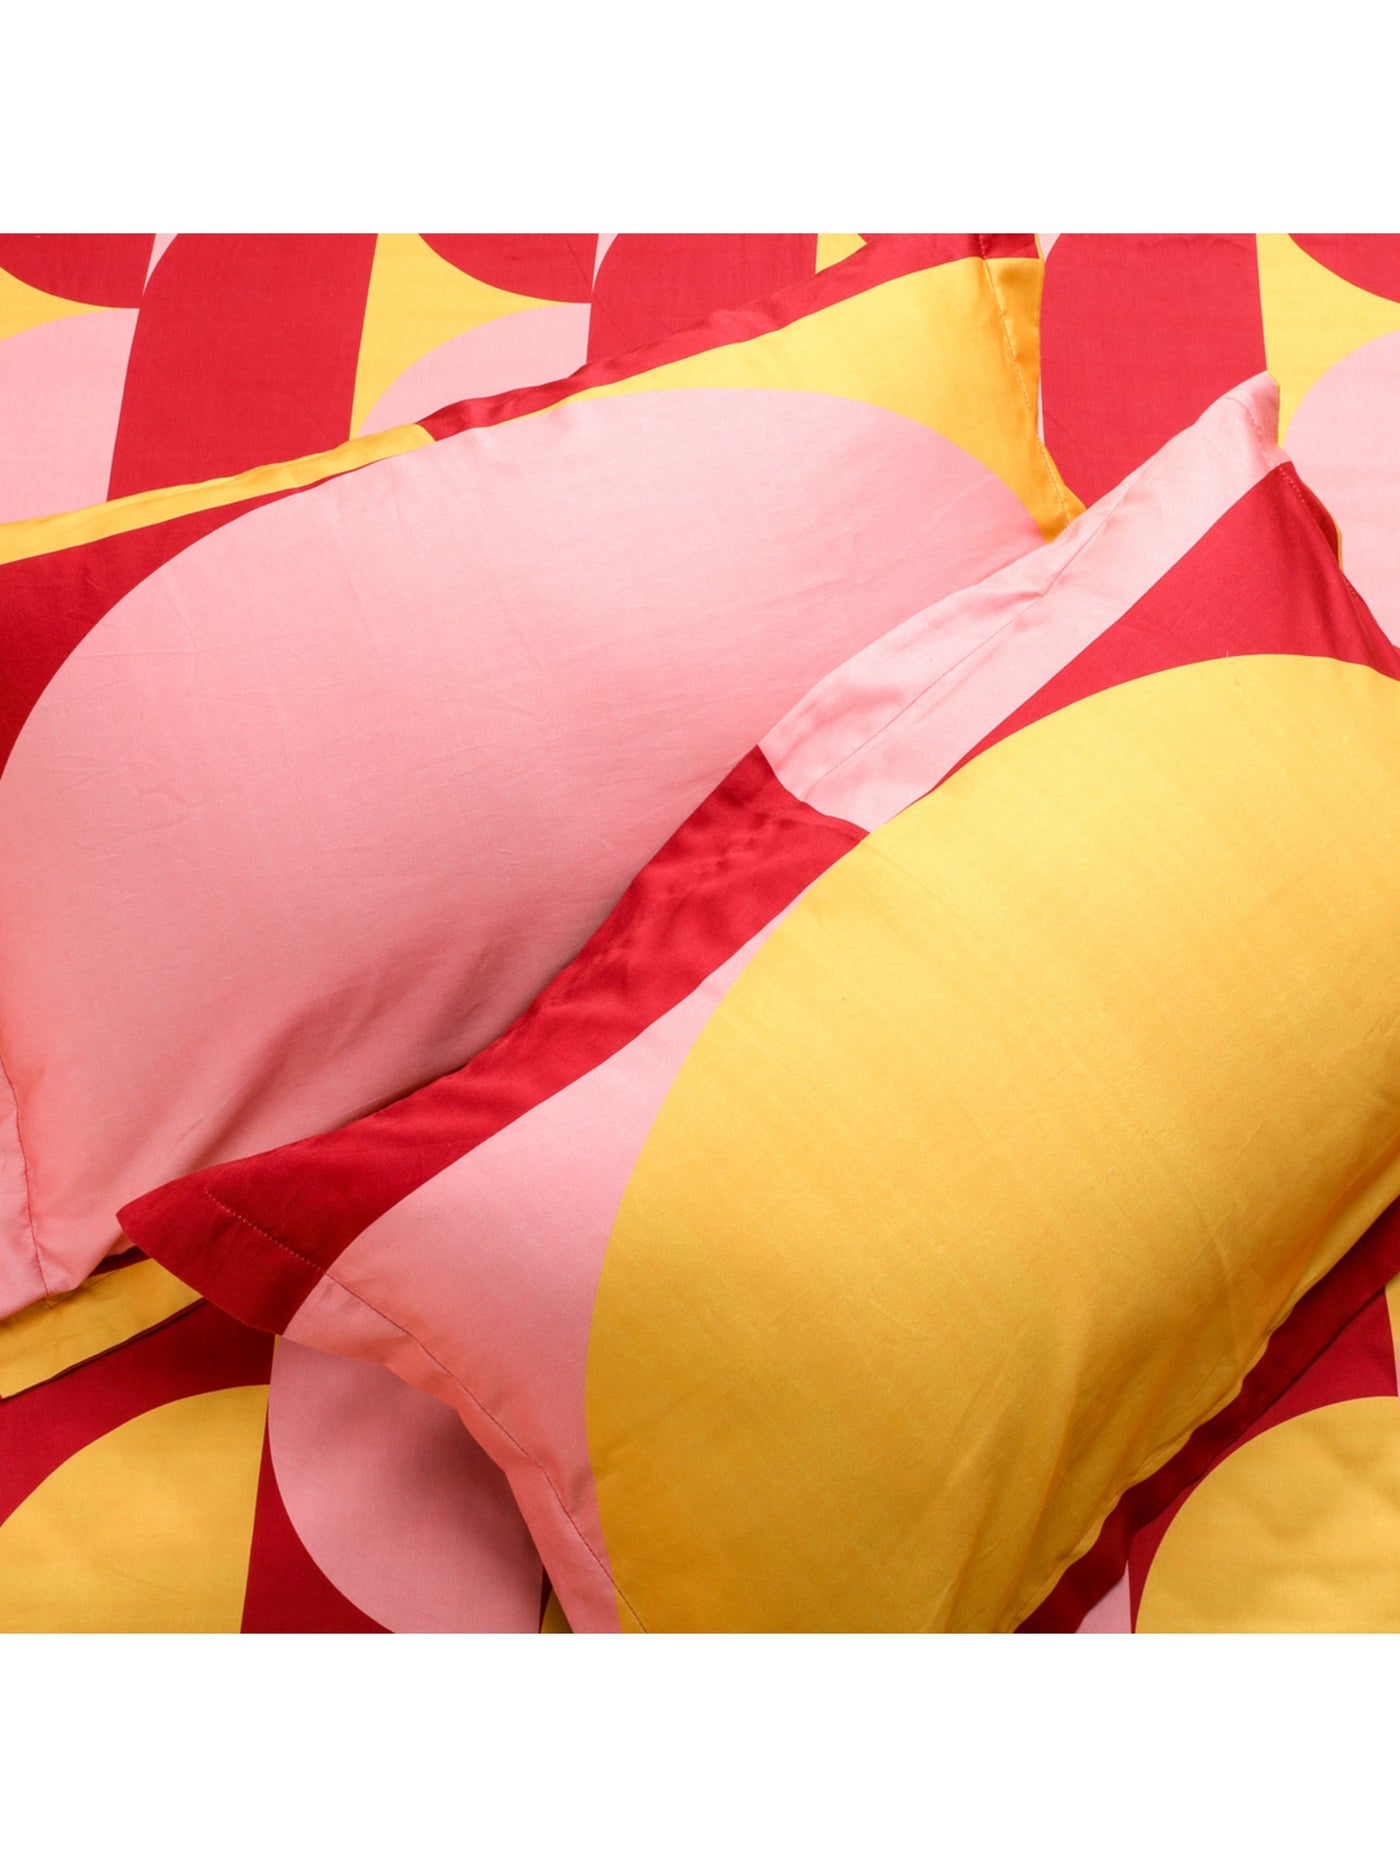 The Echo Bedsheet In Hot Red